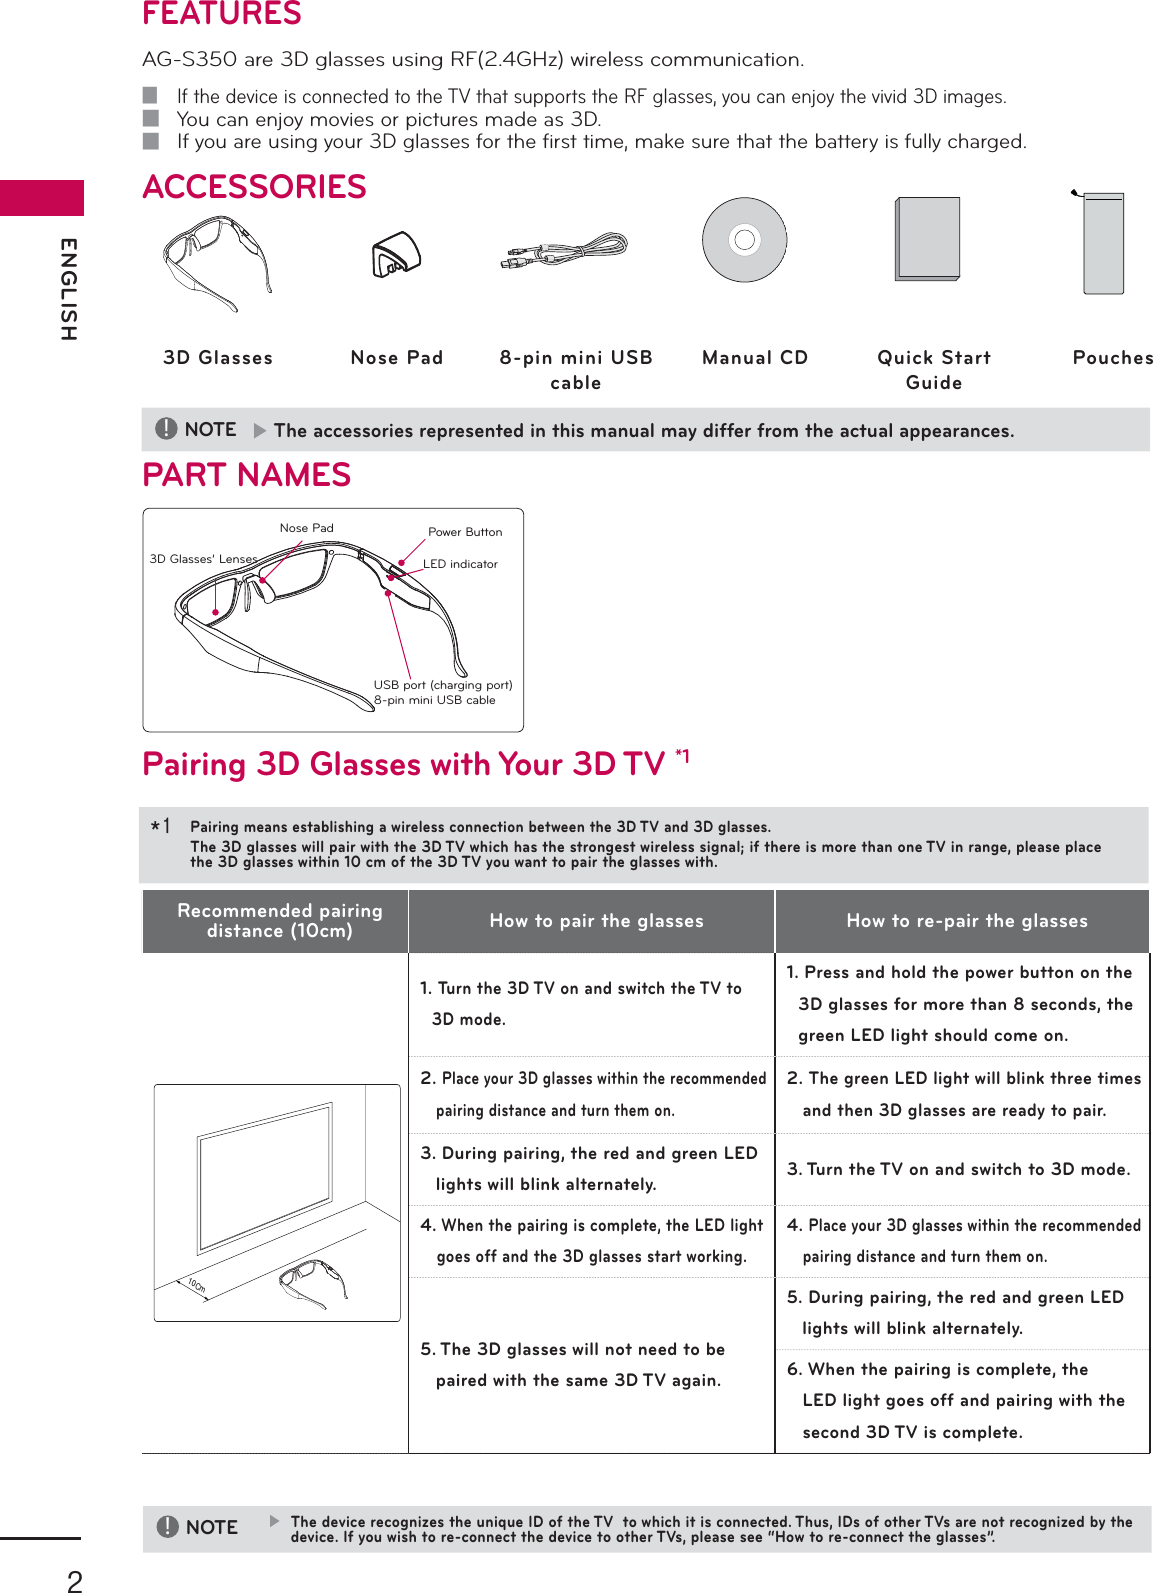 2ENGLISH!NOTE  ▶The accessories represented in this manual may differ from the actual appearances.3D Glasses Nose Pad 8-pin mini USBcableManual CD Quick Start GuidePouches3D Glasses’ LensesPower ButtonLED indicatorUSB port (charging port)8-pin mini USB cableFEATURES AG-S350 are 3D glasses using RF(2.4GHz) wireless communication. ■If the device is connected to the TV that supports the RF glasses, you can enjoy the vivid 3D images. ■You can enjoy movies or pictures made as 3D. ■If you are using your 3D glasses for the ﬁ rst time, make sure that the battery is fully charged.ACCESSORIESPART NAMESPairing 3D Glasses with Your 3D TV *1Recommended pairing distance (10cm) How to pair the glasses How to re-pair the glasses͢͡ʹΞ1.   Turn the 3D TV on and switch the TV to 3D mode.1.  Press and hold the power button on the 3D glasses for more than 8 seconds, the green LED light should come on.2.  Place your 3D glasses within the recommended pairing distance and turn them on.2.  The green LED light will blink three times and then 3D glasses are ready to pair.3.  During pairing, the red and green LED lights will blink alternately. 3.  Turn the TV on and switch to 3D mode.4.  When the pairing is complete, the LED light goes off and the 3D glasses start working.4.  Place your 3D glasses within the recommended pairing distance and turn them on.5.  The 3D glasses will not need to be paired with the same 3D TV again.5.  During pairing, the red and green LED lights will blink alternately.6.  When the pairing is complete, the LED light goes off and pairing with the second 3D TV is complete.Nose PadPairing means establishing a wireless connection between the 3D TV and 3D glasses.The 3D glasses will pair with the 3D TV which has the strongest wireless signal; if there is more than one TV in range, please place the 3D glasses within 10 cm of the 3D TV you want to pair the glasses with.*1 !NOTE ▶The device recognizes the unique ID of the TV  to which it is connected. Thus, IDs of other TVs are not recognized by the device. If you wish to re-connect the device to other TVs, please see “How to re-connect the glasses”.